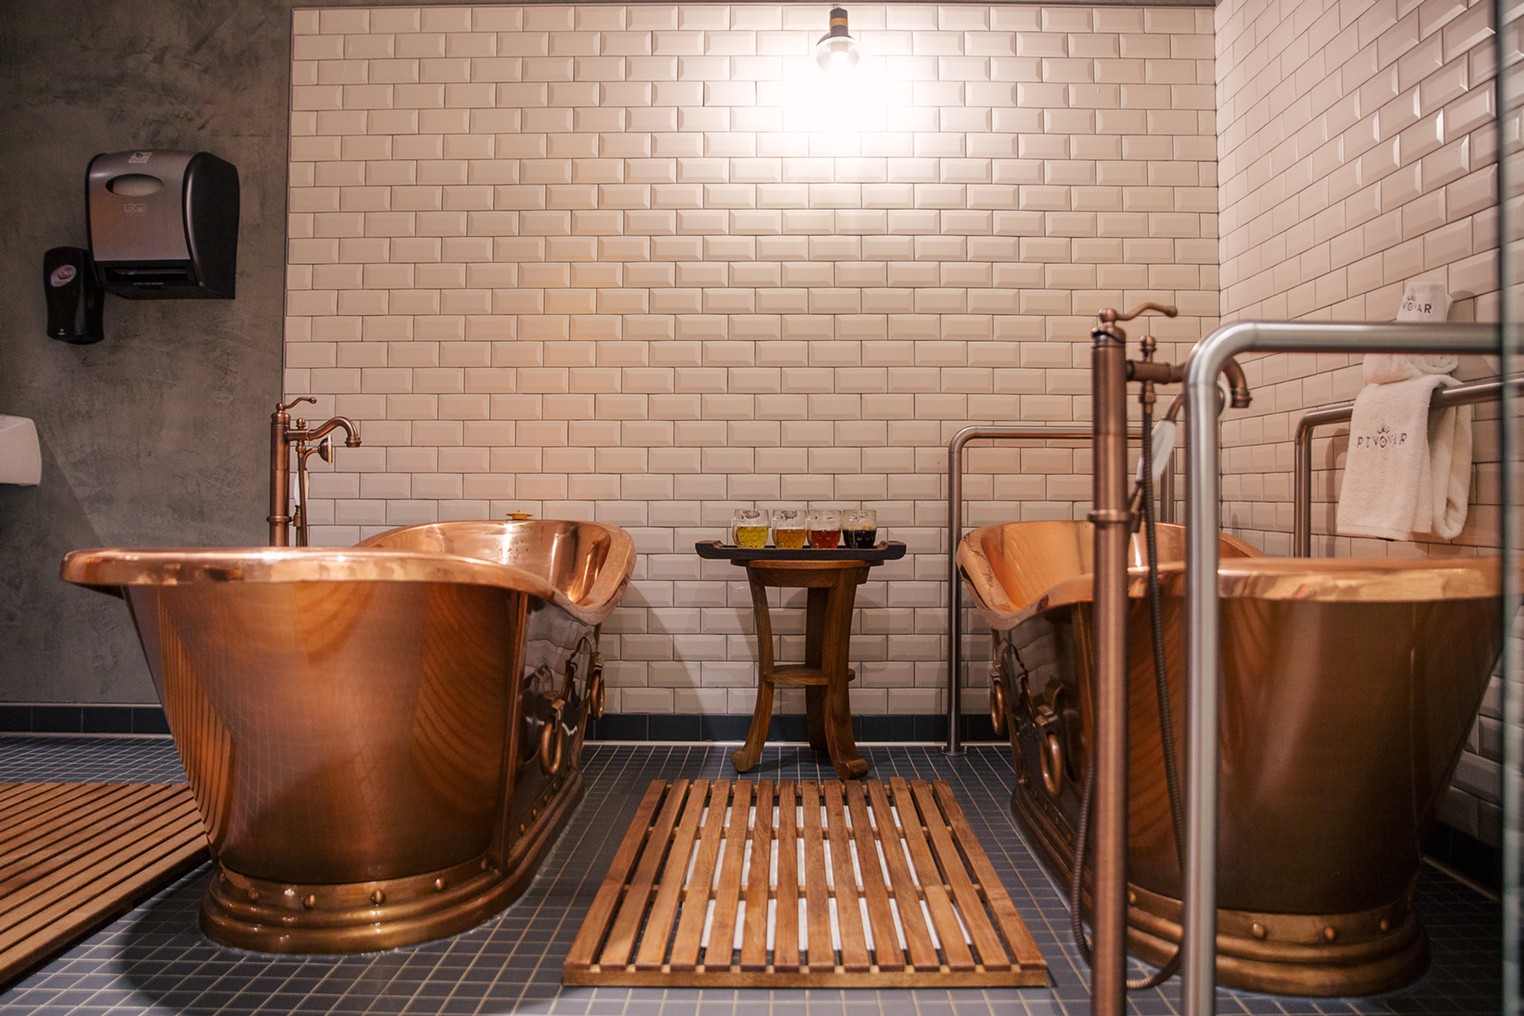 Feel the Need to Visit the Silos in Waco? There’s a Czech Beer Spa For That.